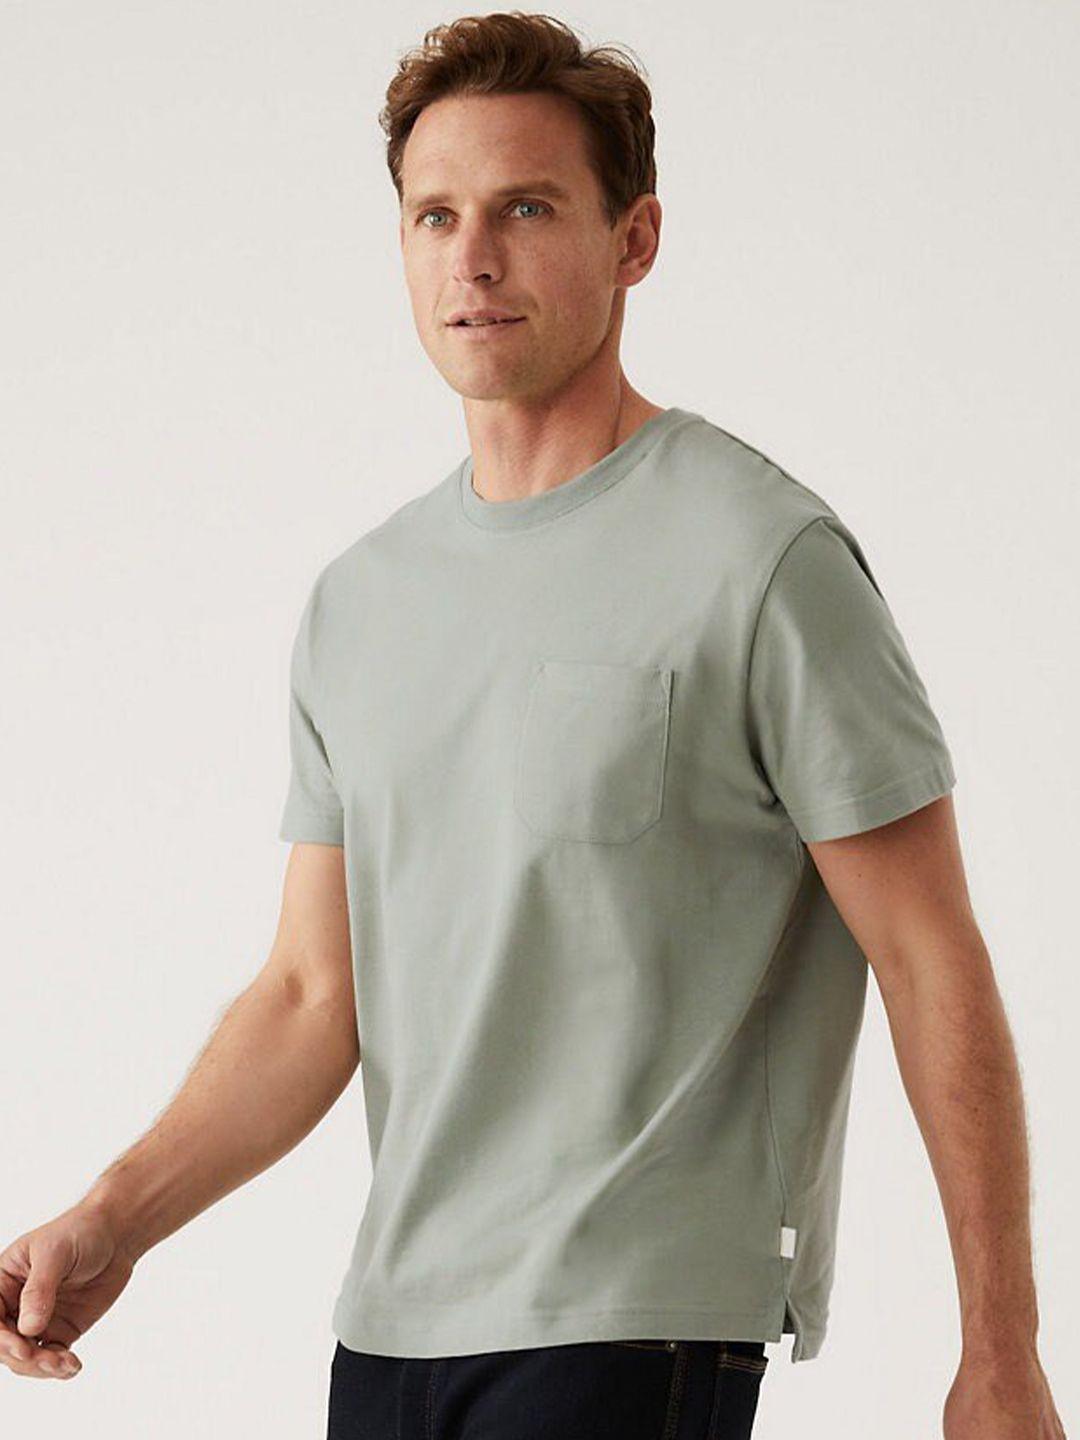 marks & spencer round neck pure cotton t-shirt